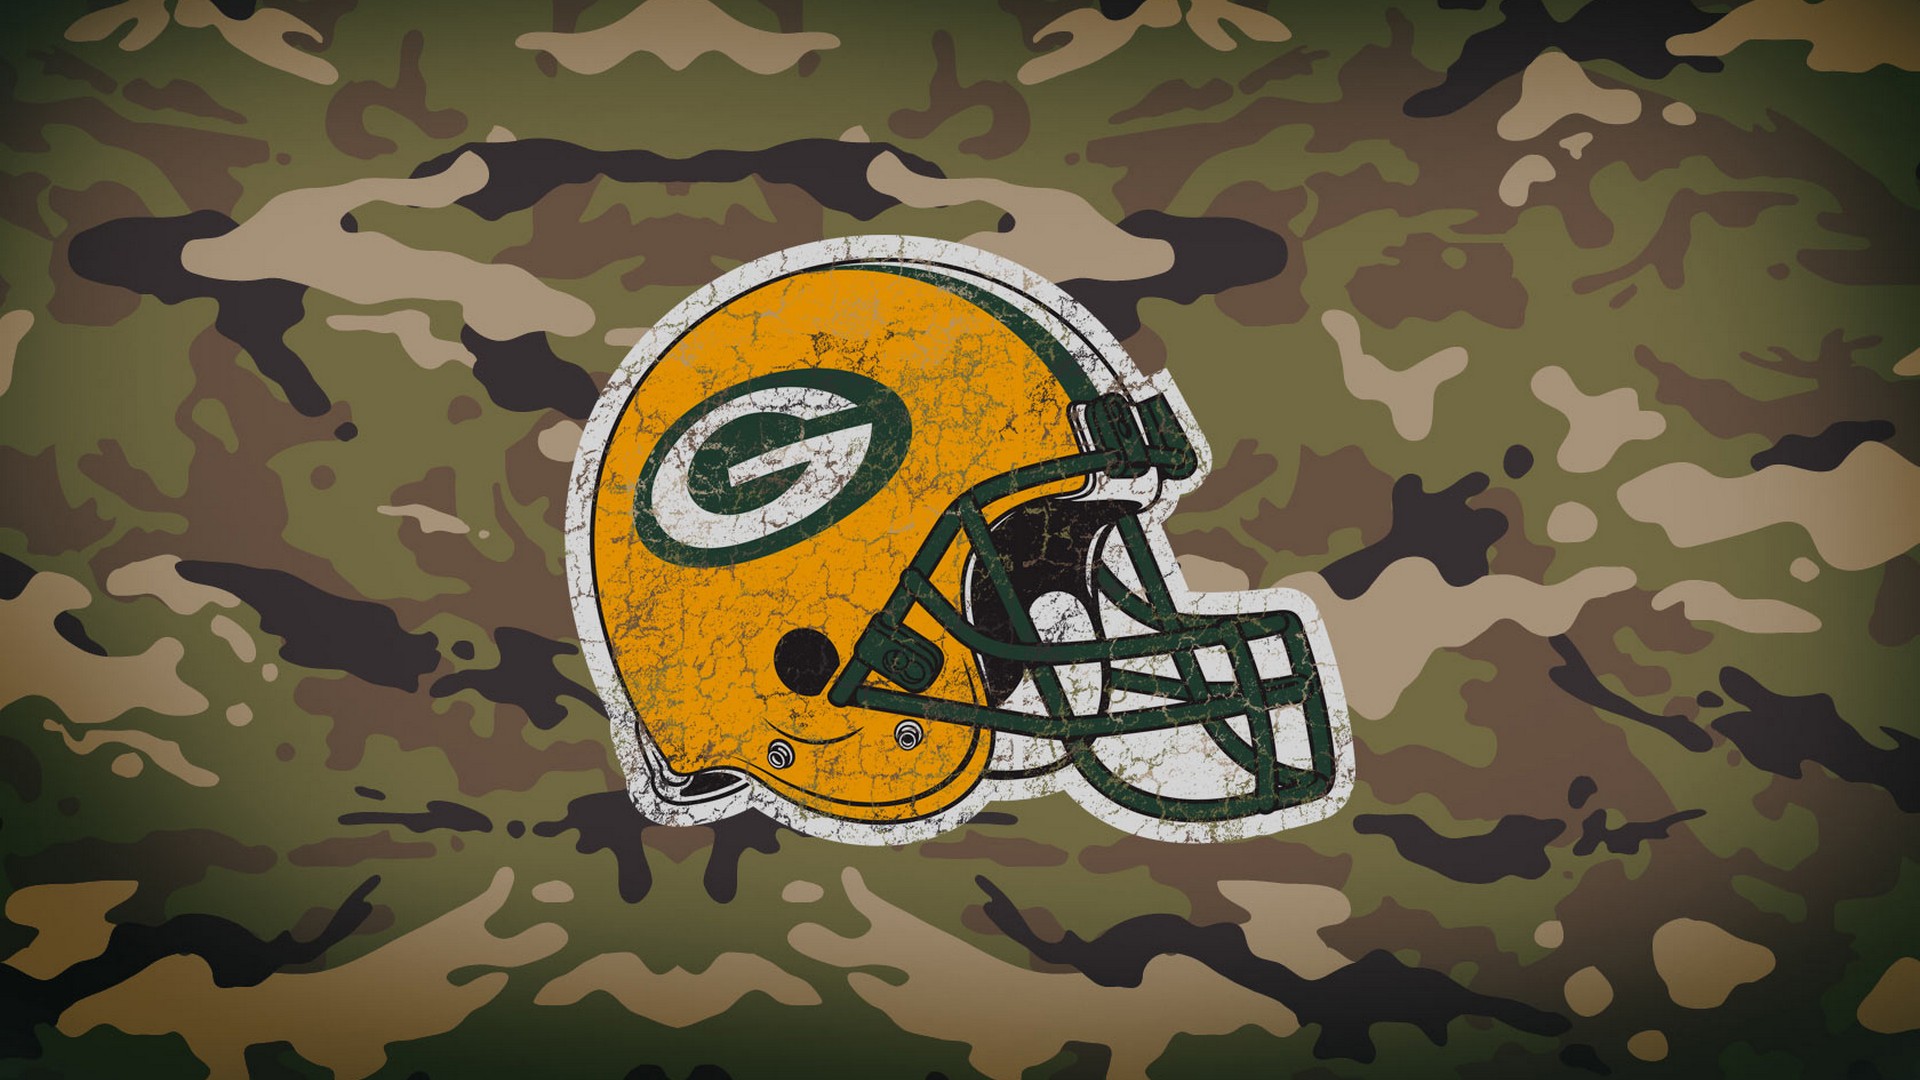 Green Bay Packers Wallpaper For Mac OS with high-resolution 1920x1080 pixel. Download and set as wallpaper for Desktop Computer, Apple iPhone X, XS Max, XR, 8, 7, 6, SE, iPad, Android